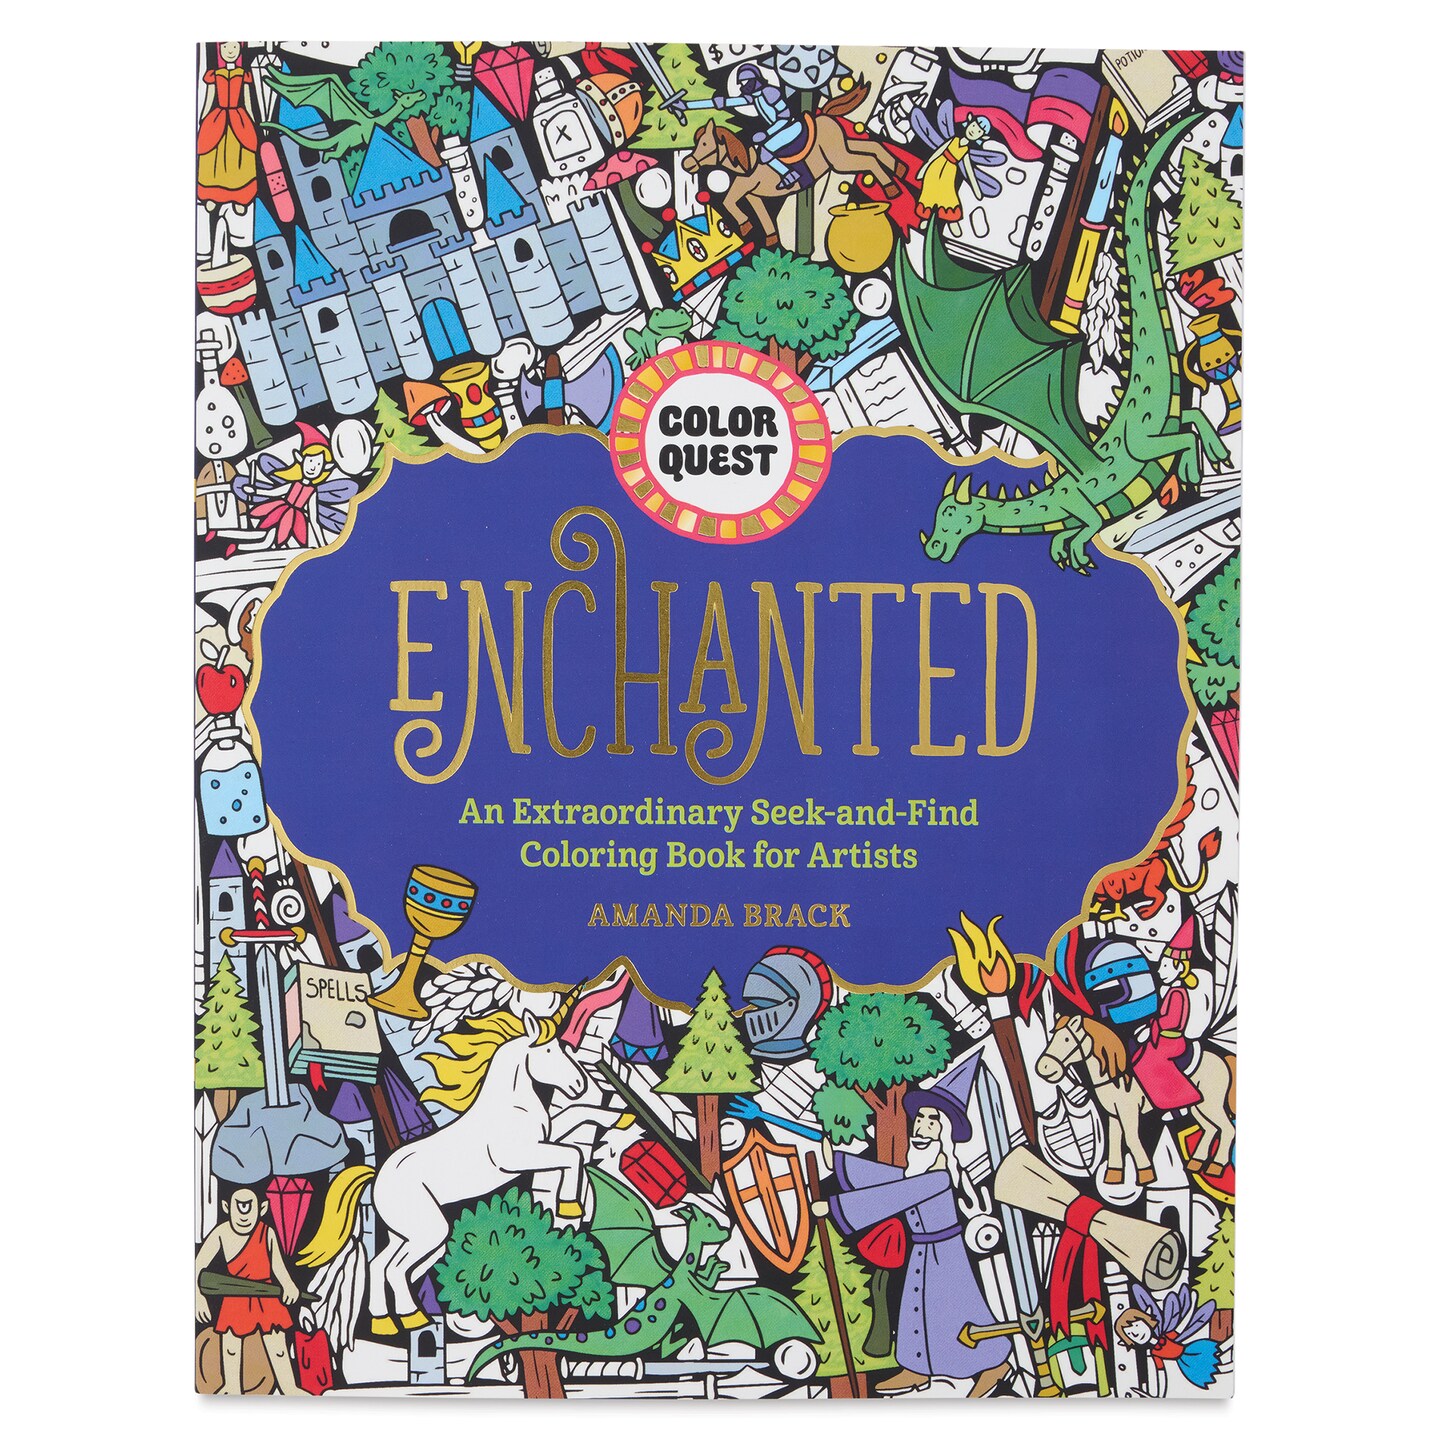 Color Quest Seek-and-Find Coloring Books - Enchanted